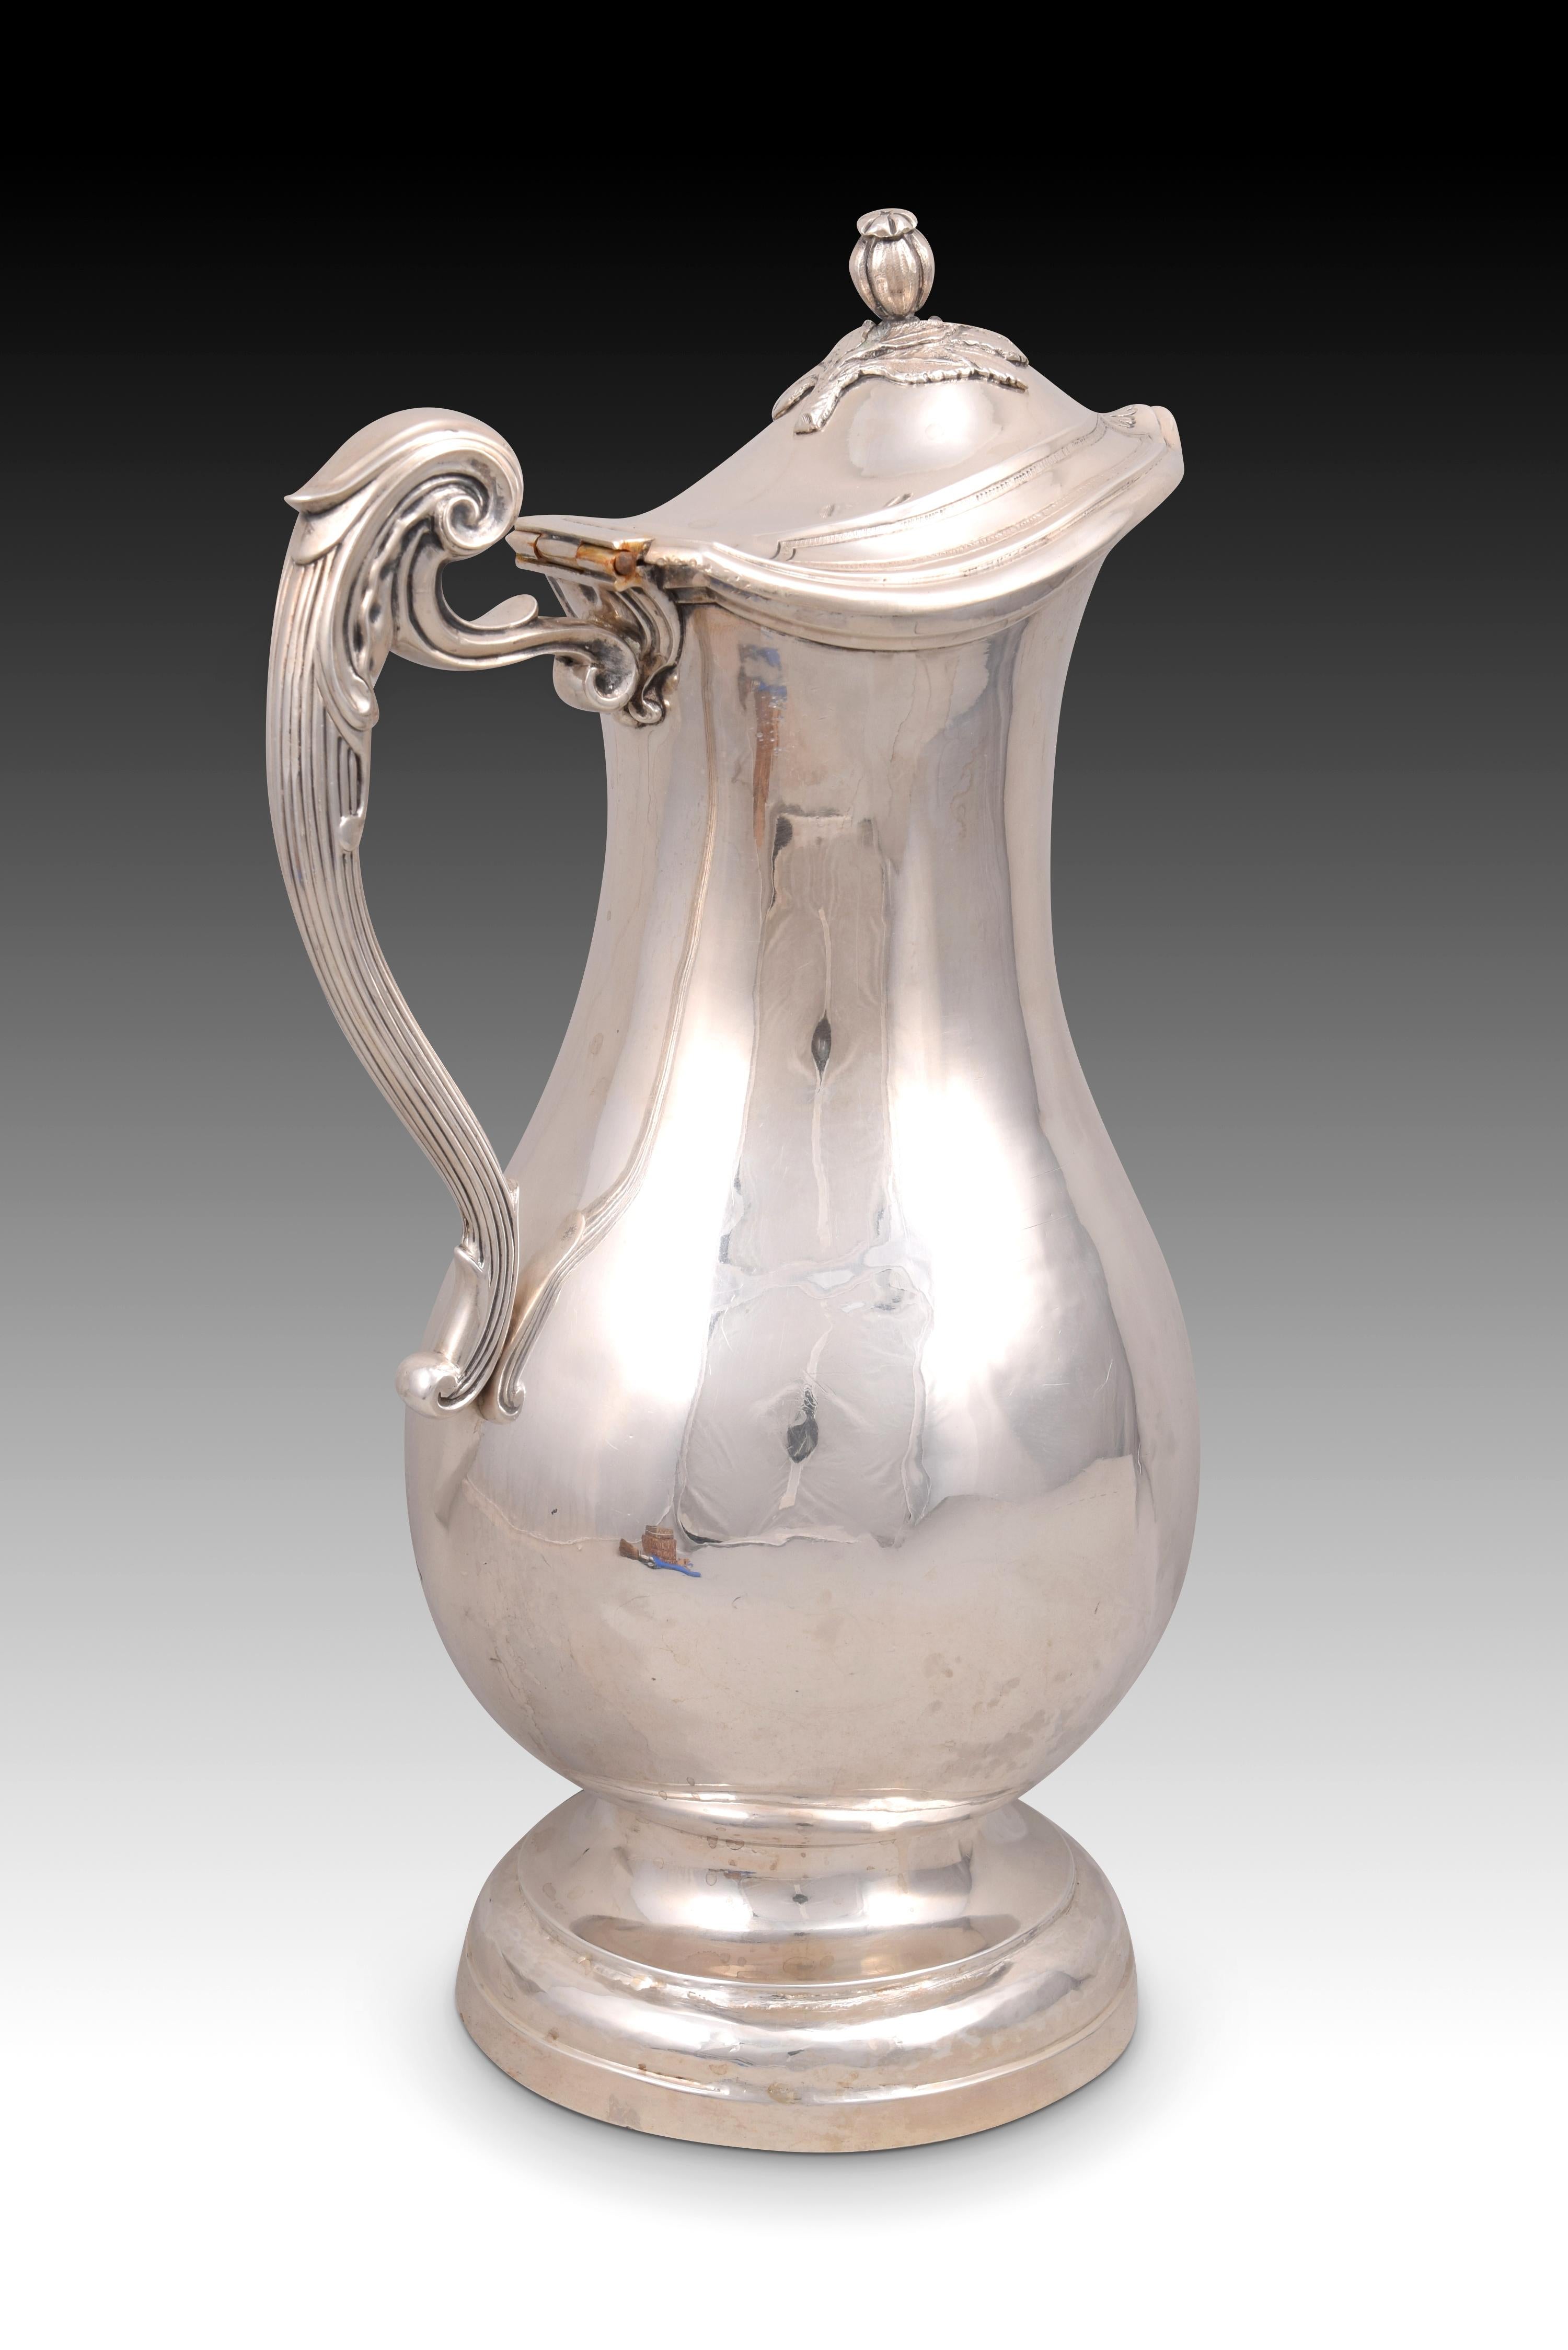 Jug. Silver. FAXARDO, Antonio. Spain, Cadiz, 1787; highlighted in Italy (Naples). 
With contrasting and burilada marks. 
Published in Encyclopedia of Spanish and Viceregal American Silver. Bibliography: Fernández, Alejandro; Munoa, Raphael;